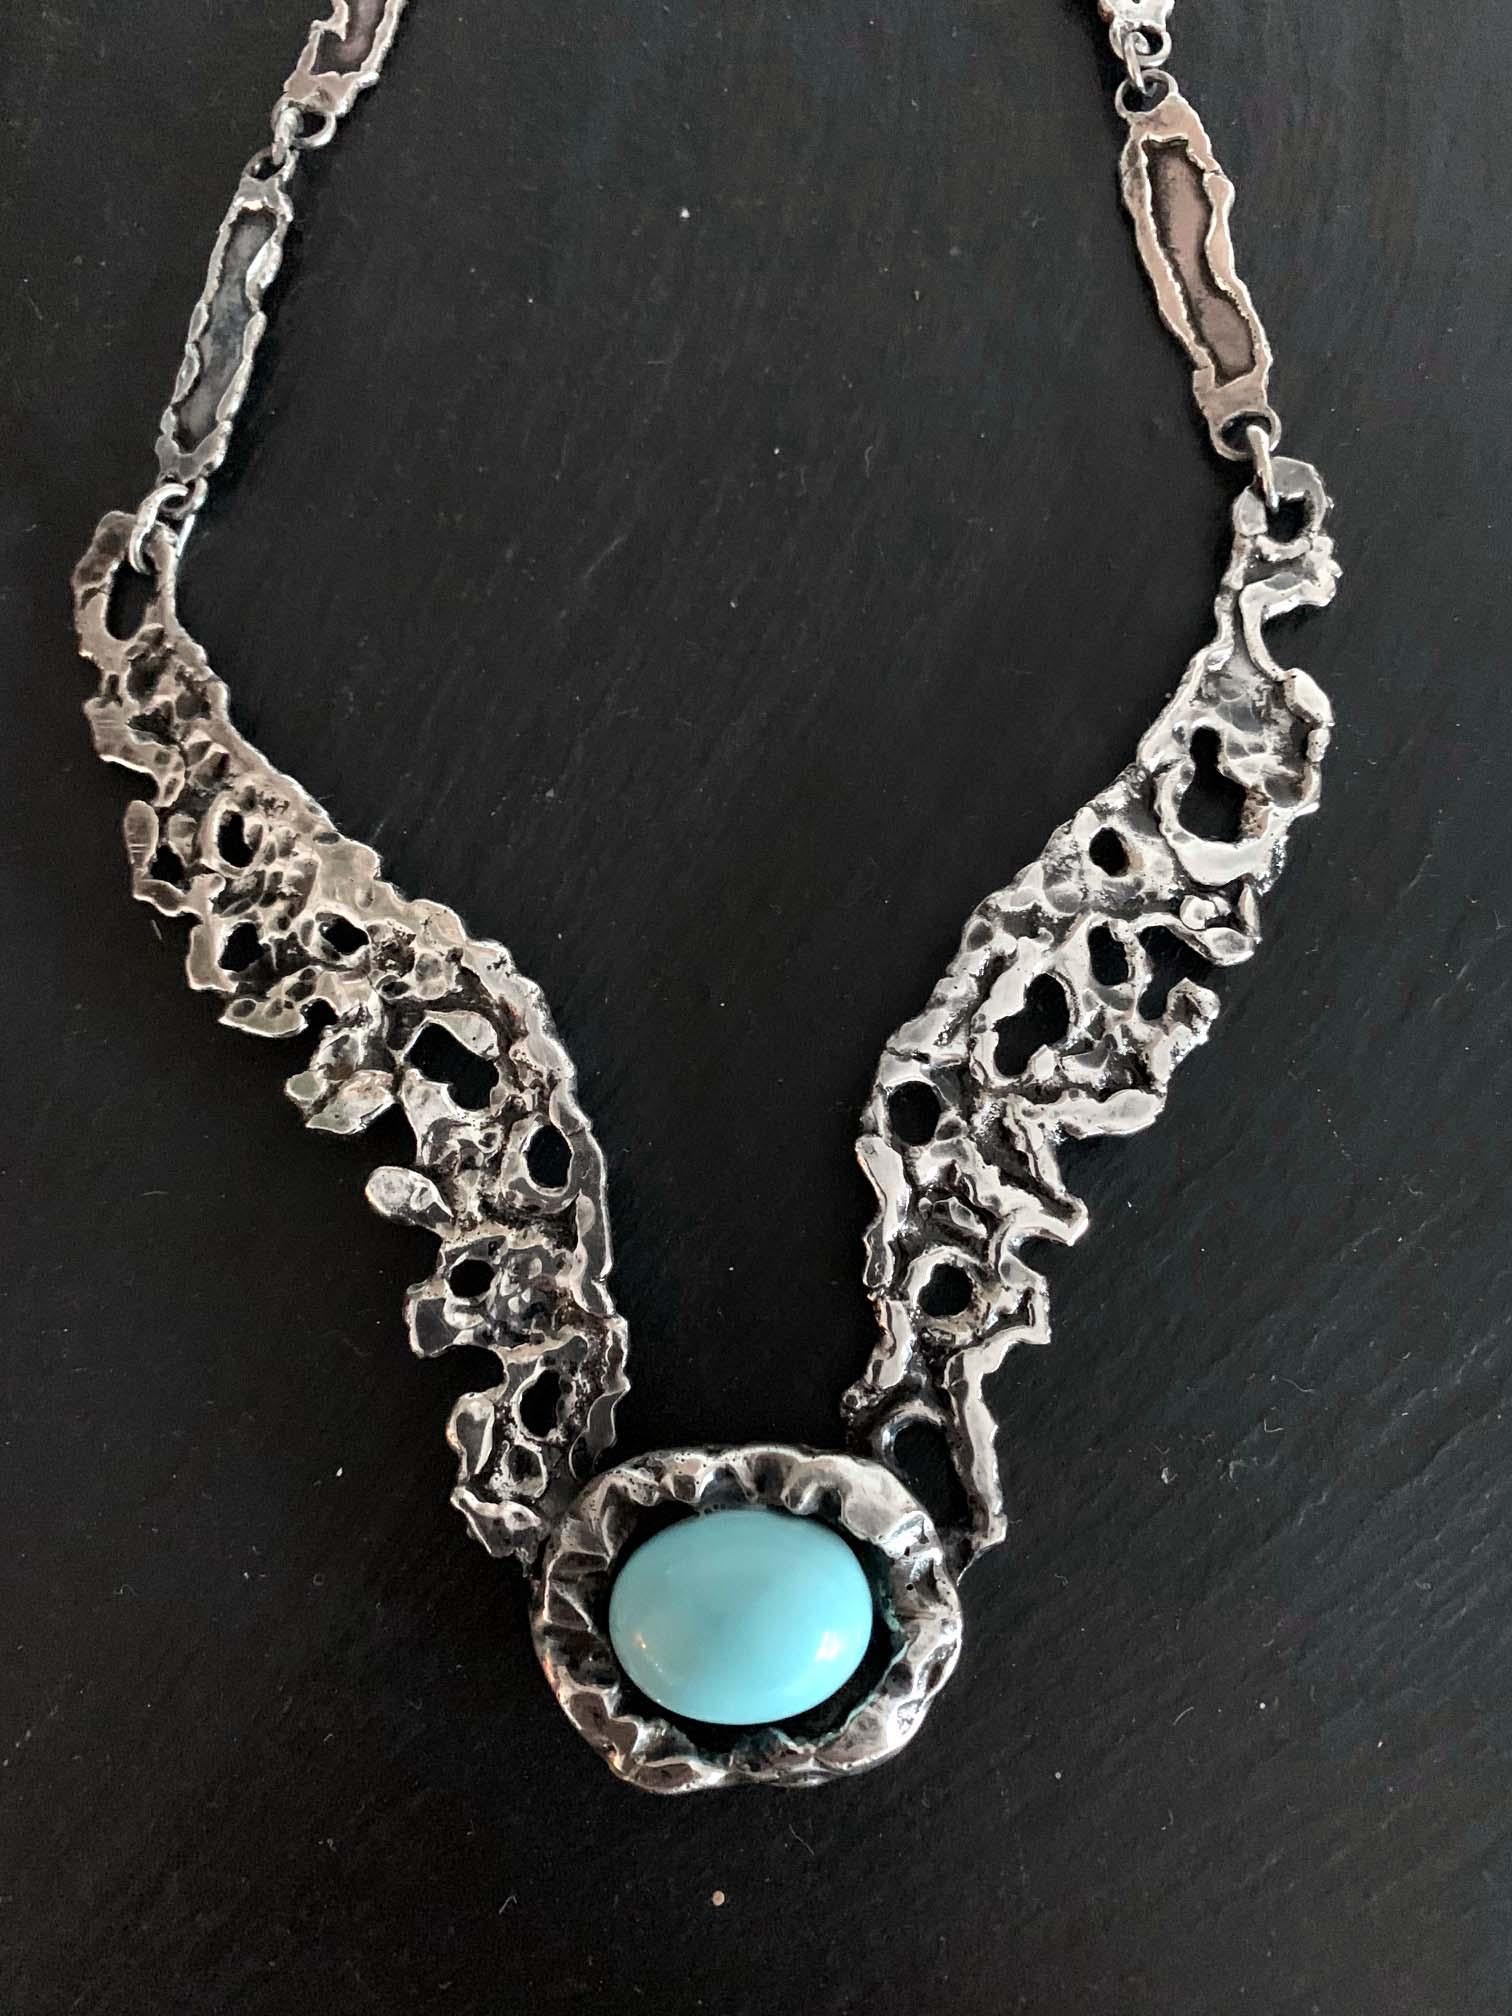 A sterling silver necklace with a turquoise color cabochon set in by Mexican silversmith Tane Orfebres circa 1960-1970s. The chain links were crafted in a modernist sculptural form with an aesthetic of brutalism. The lower bands were fixed with the